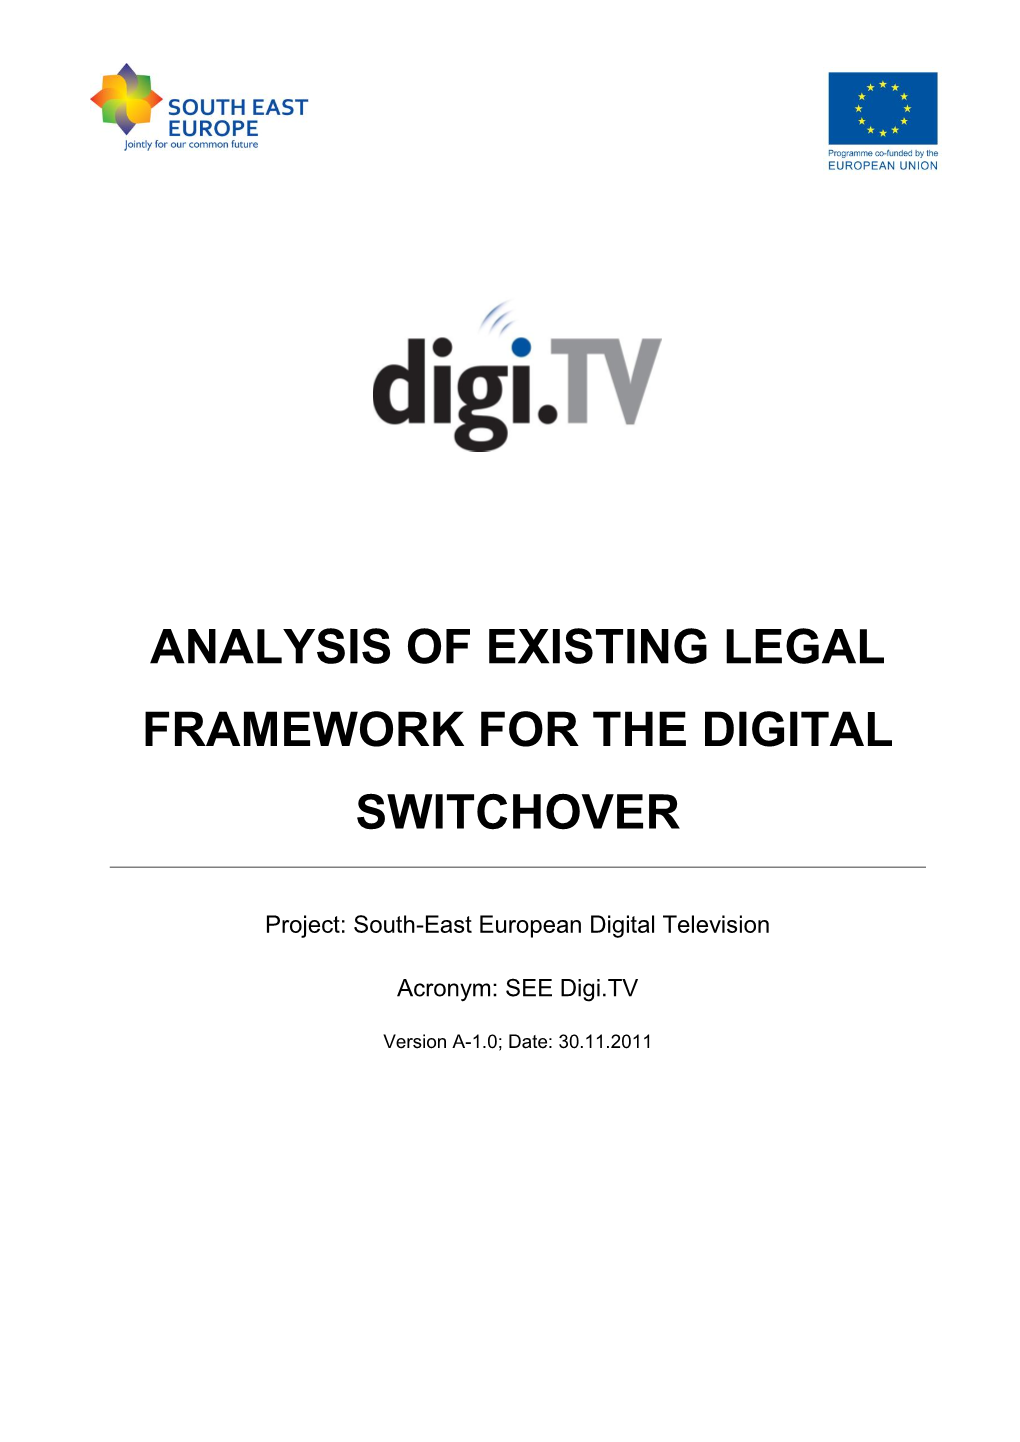 Analysis of Existing Legal Framework for the Digital Switchover